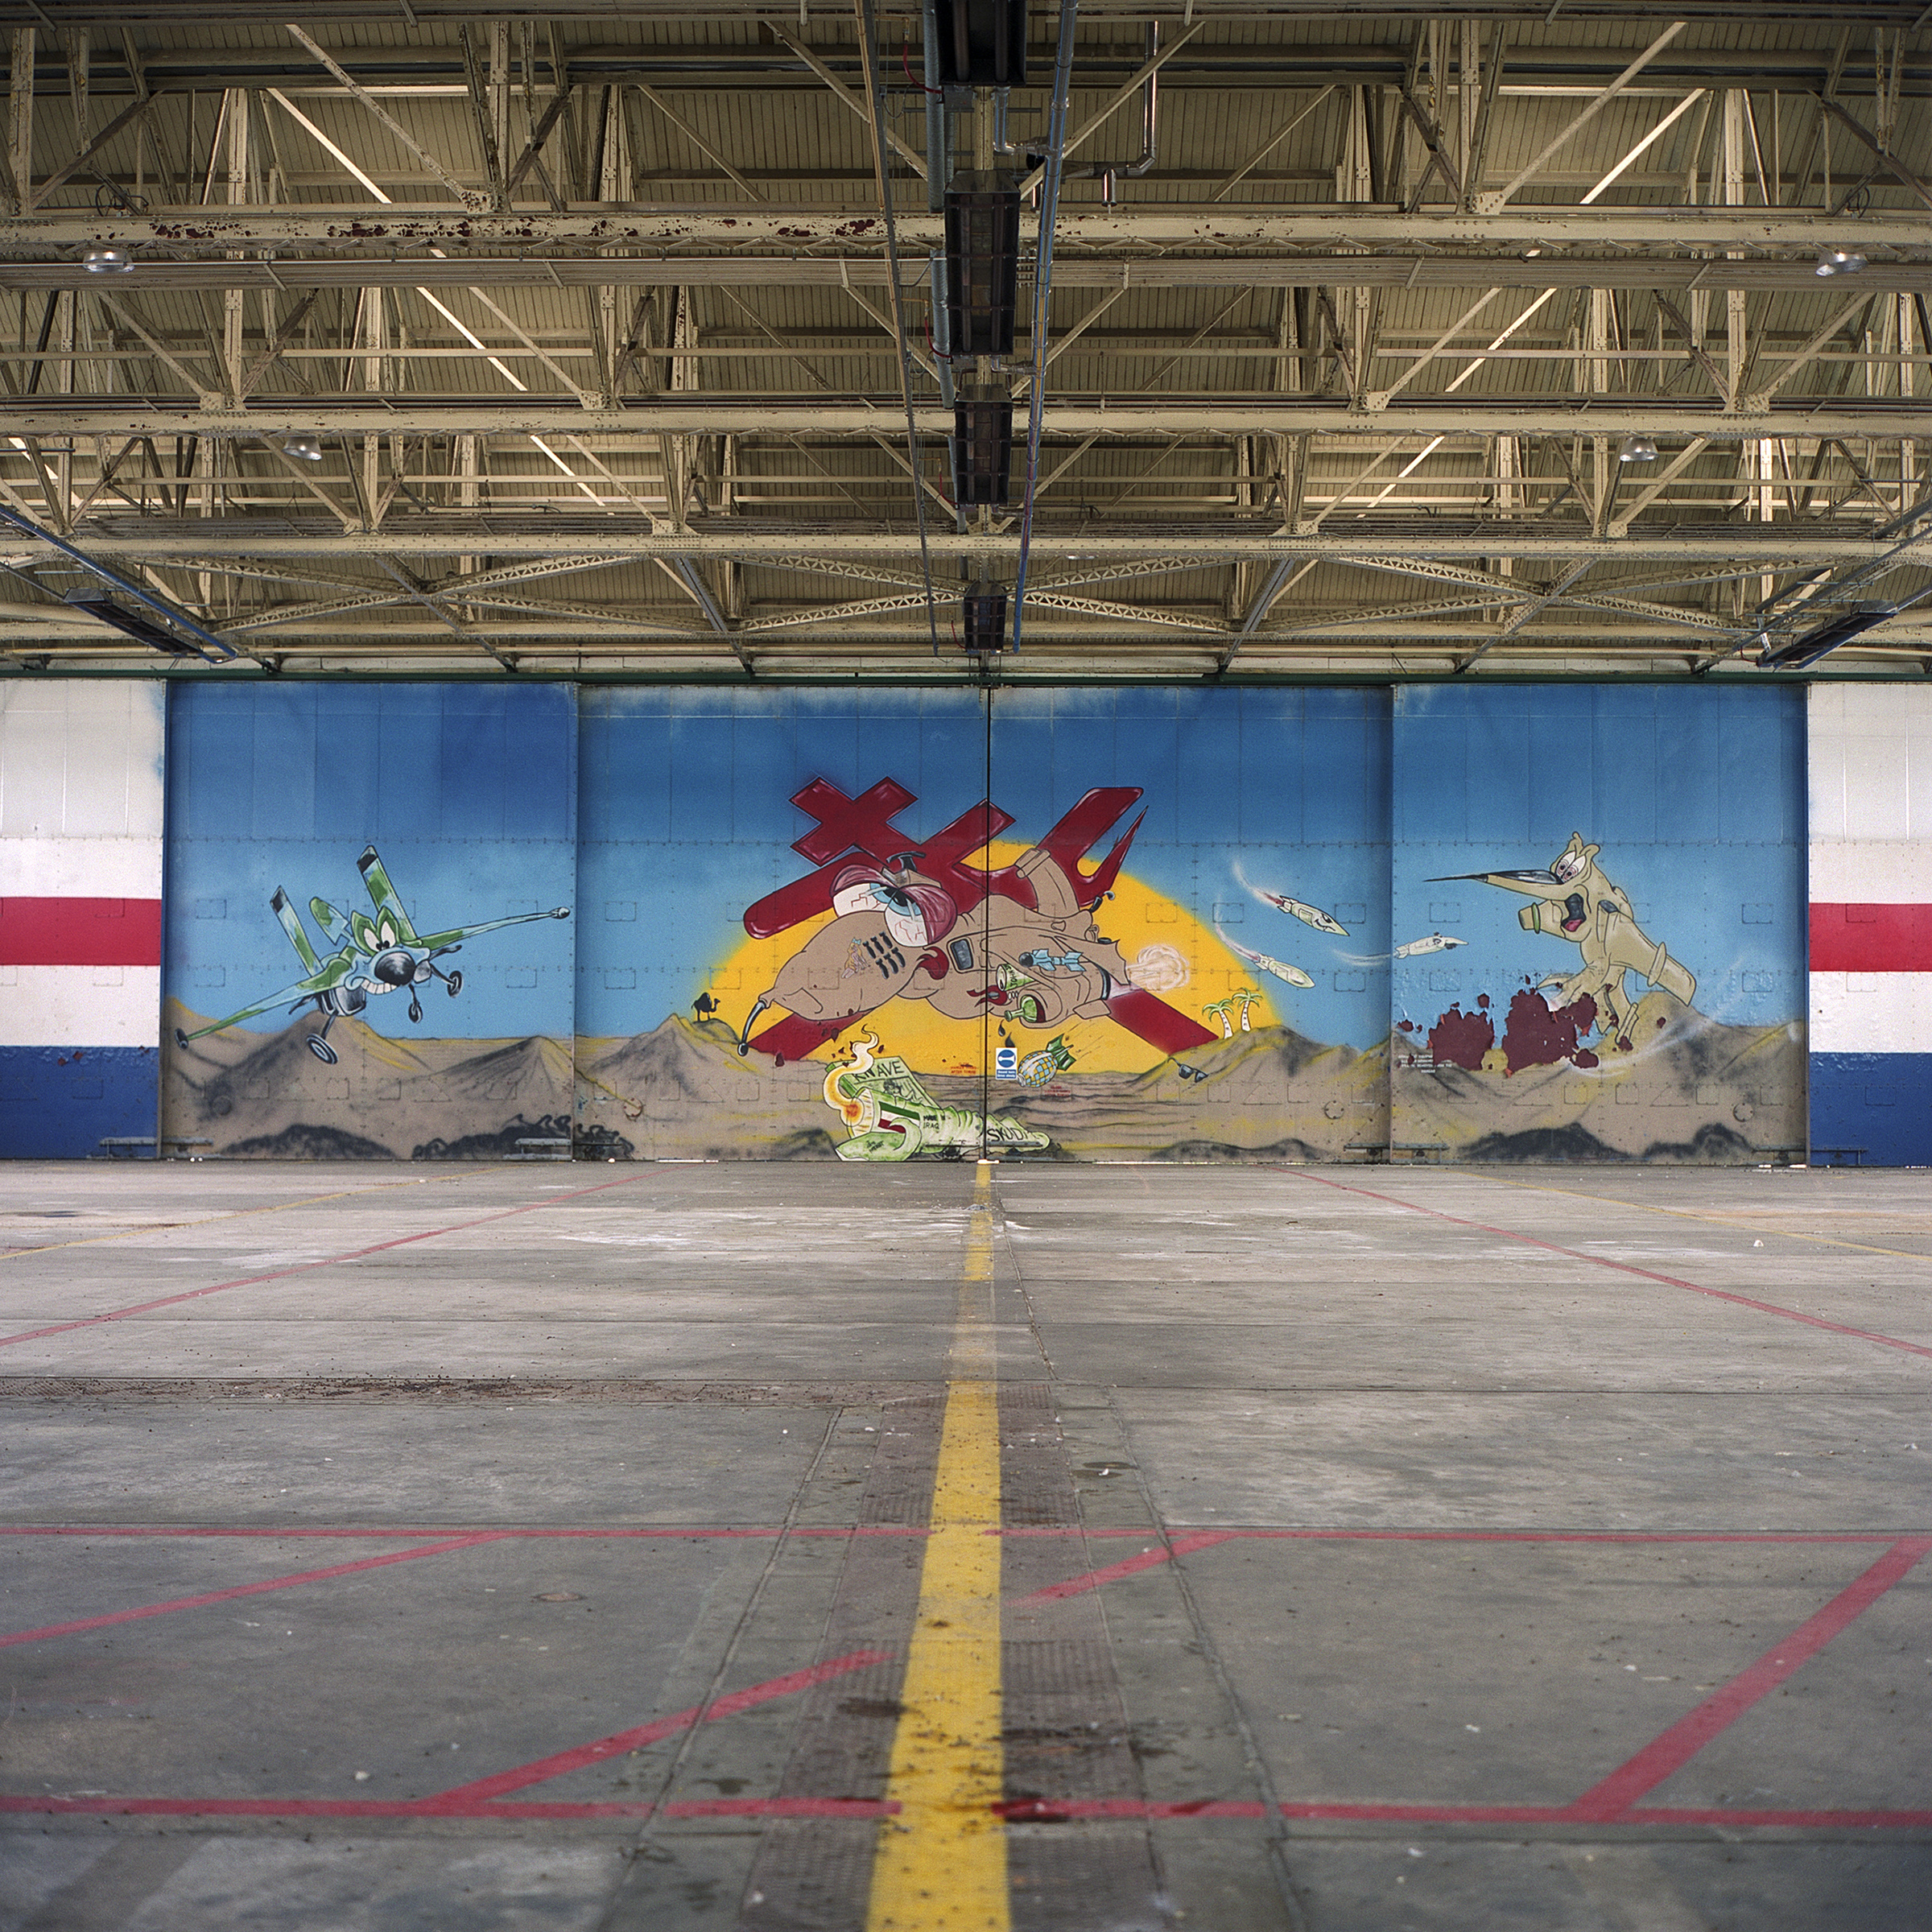 Yellow line (centered), with red lines that criss-cross, draws the eye to a large mural in the background, painted with three cartoon aircaft in hangar. Large central craft is red in from of a yellow sun 